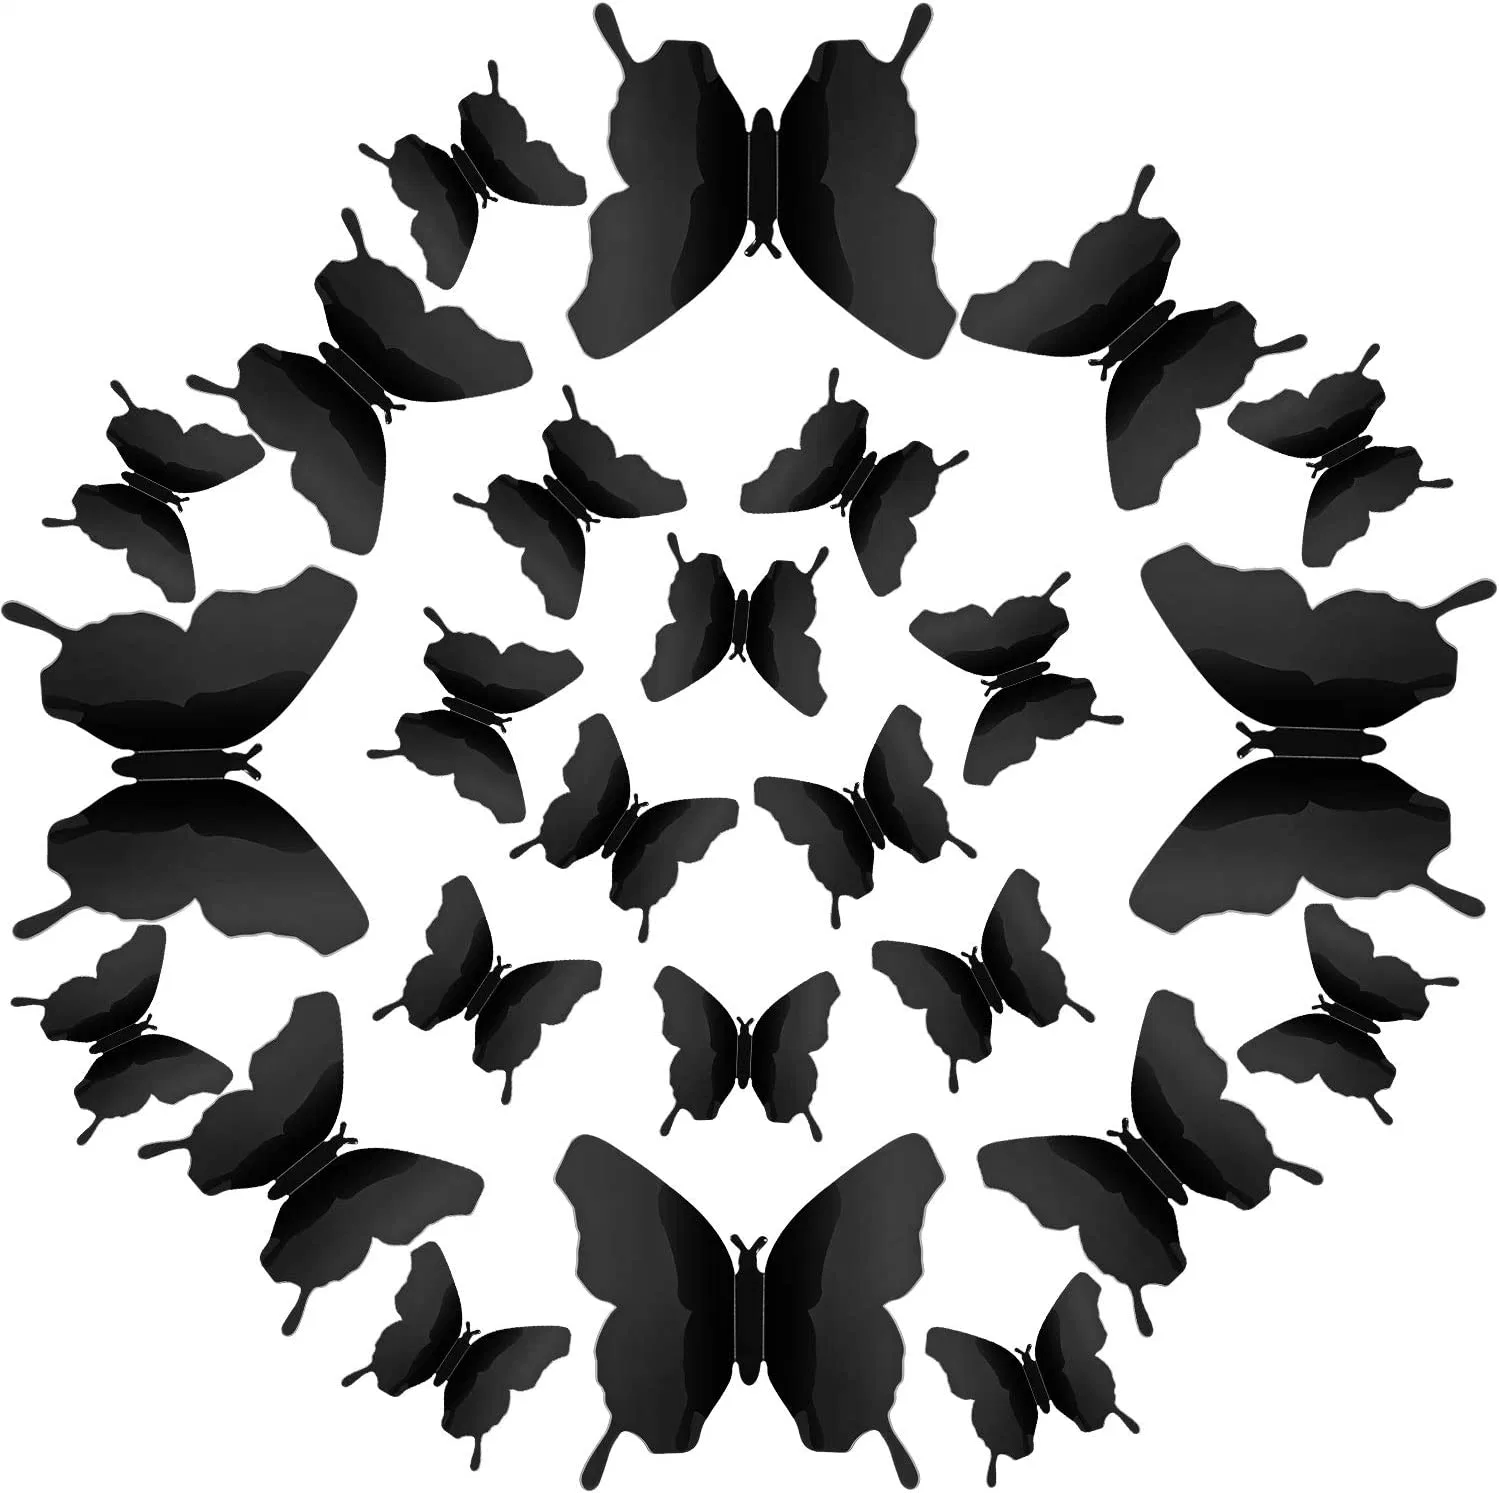 Black 48 Pieces DIY Mirror Butterfly 3D Butterfly Wall Stickers Decals Wall Art for Home Nursery Classroom Kids Bedroom Bathroom Living Room Decoration